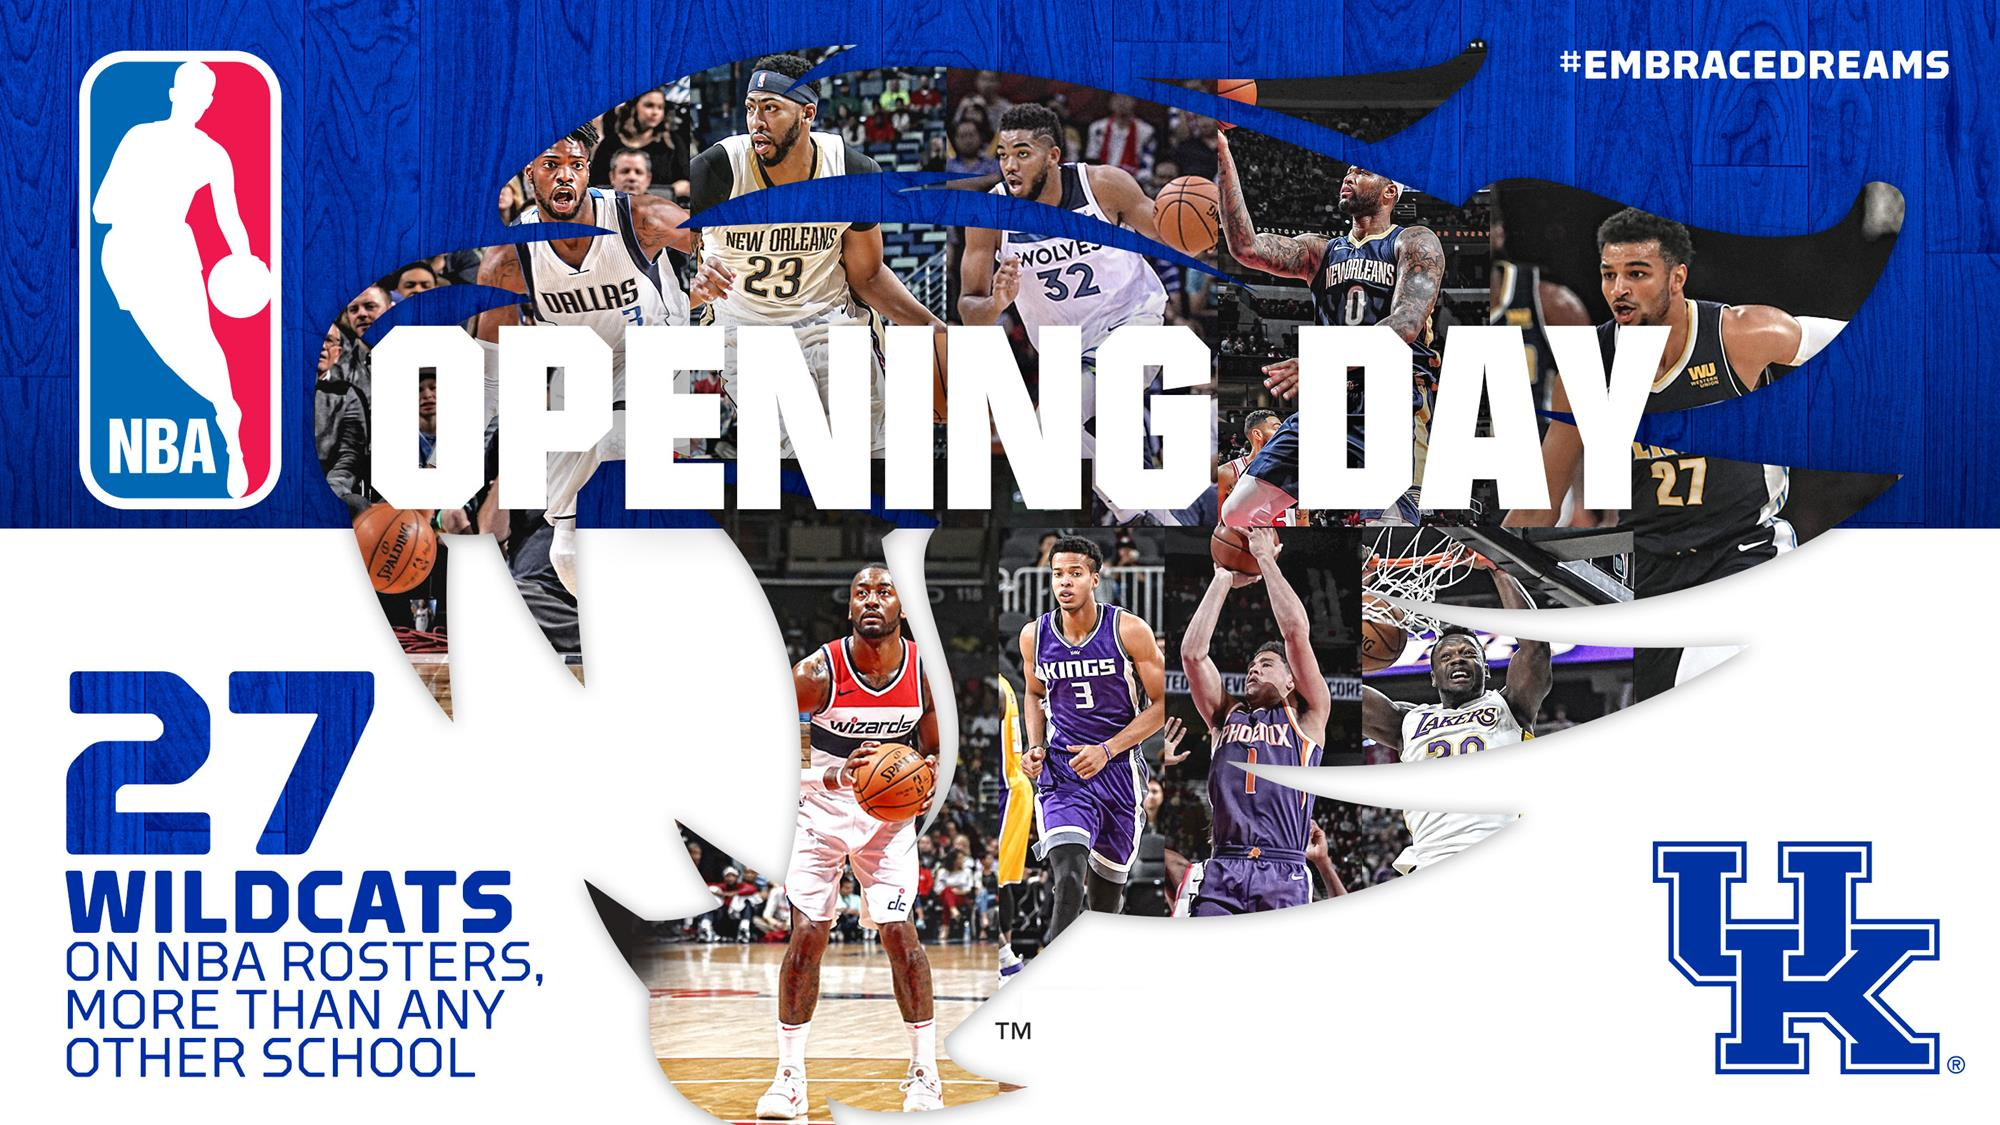 UK Leads the Nation with 27 Players on NBA Opening-Day Rosters